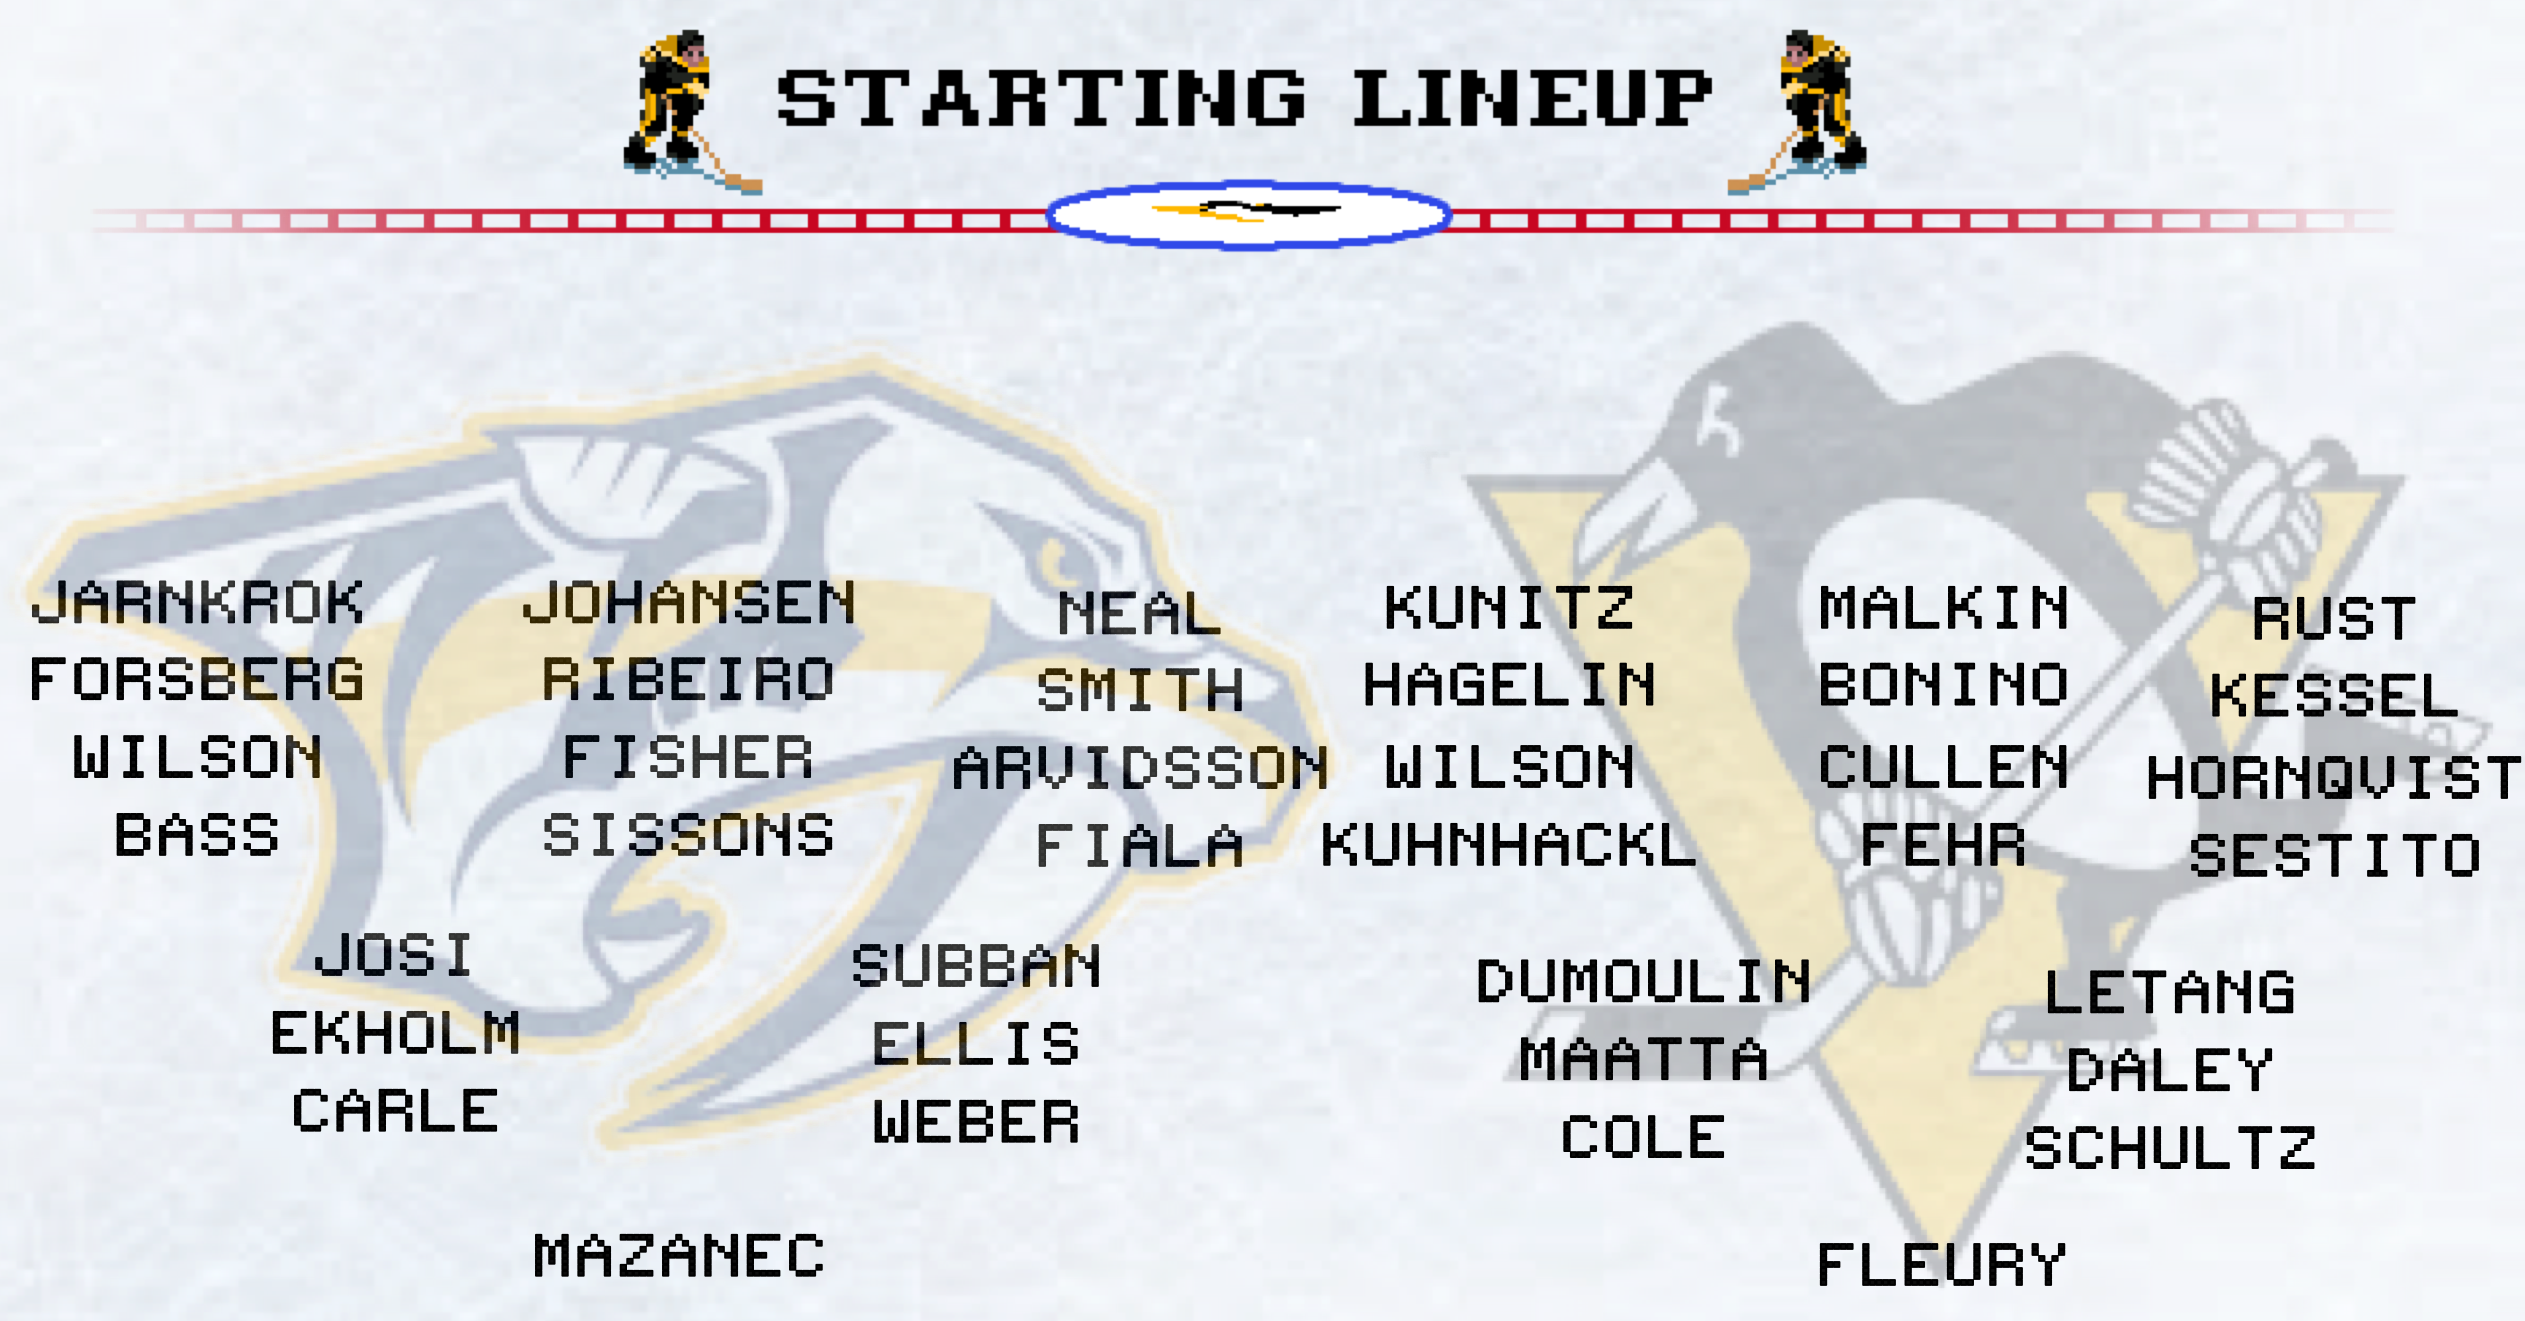 The Pens have more injuries than a hypochondriac so this is a tentative line-up to say the least. Follow the discussion below for updates throughout the day